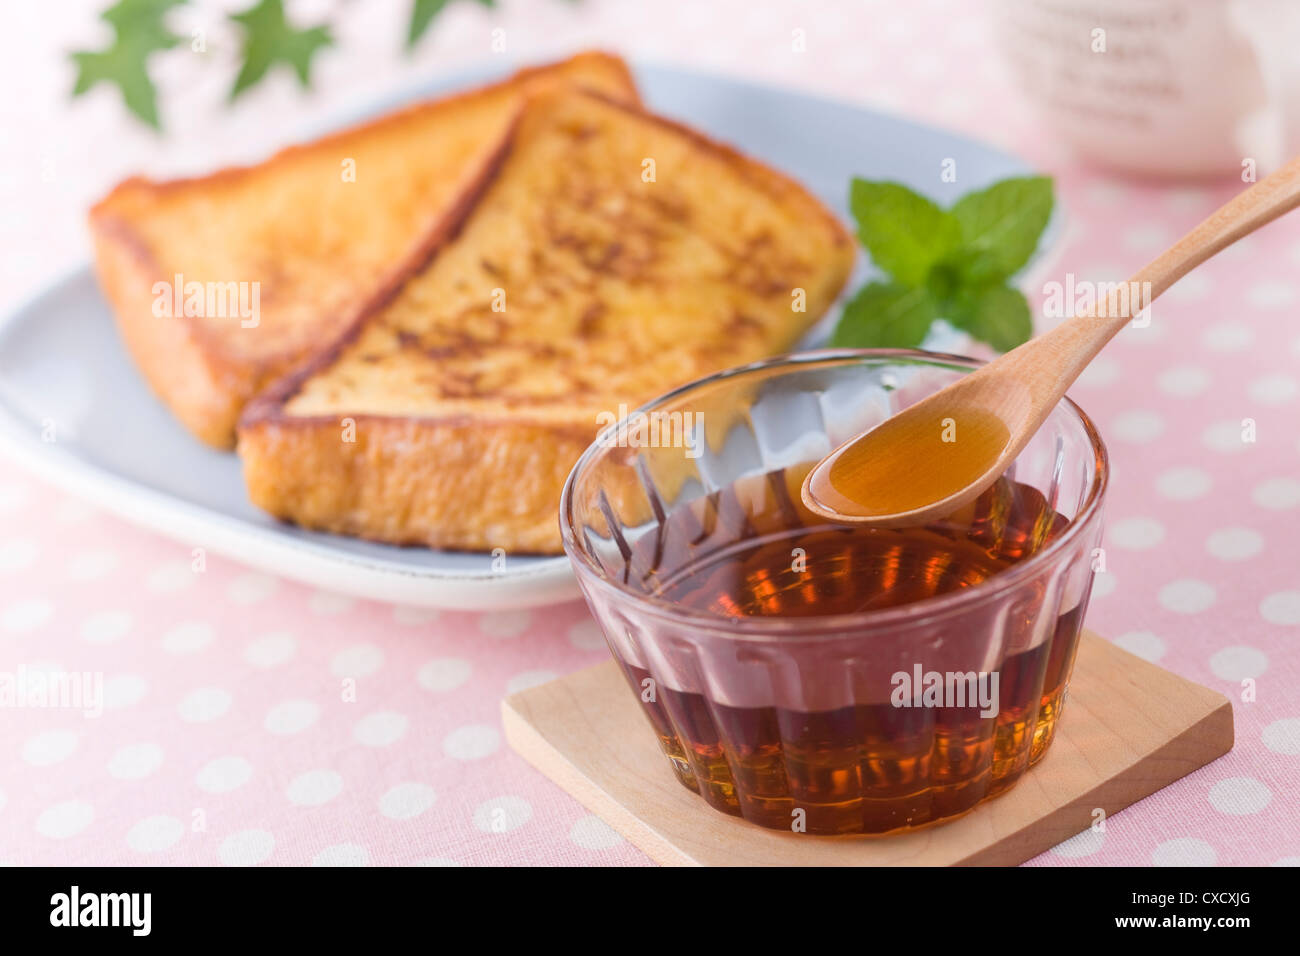 Scooping Maple Syrup with Spoon Stock Photo